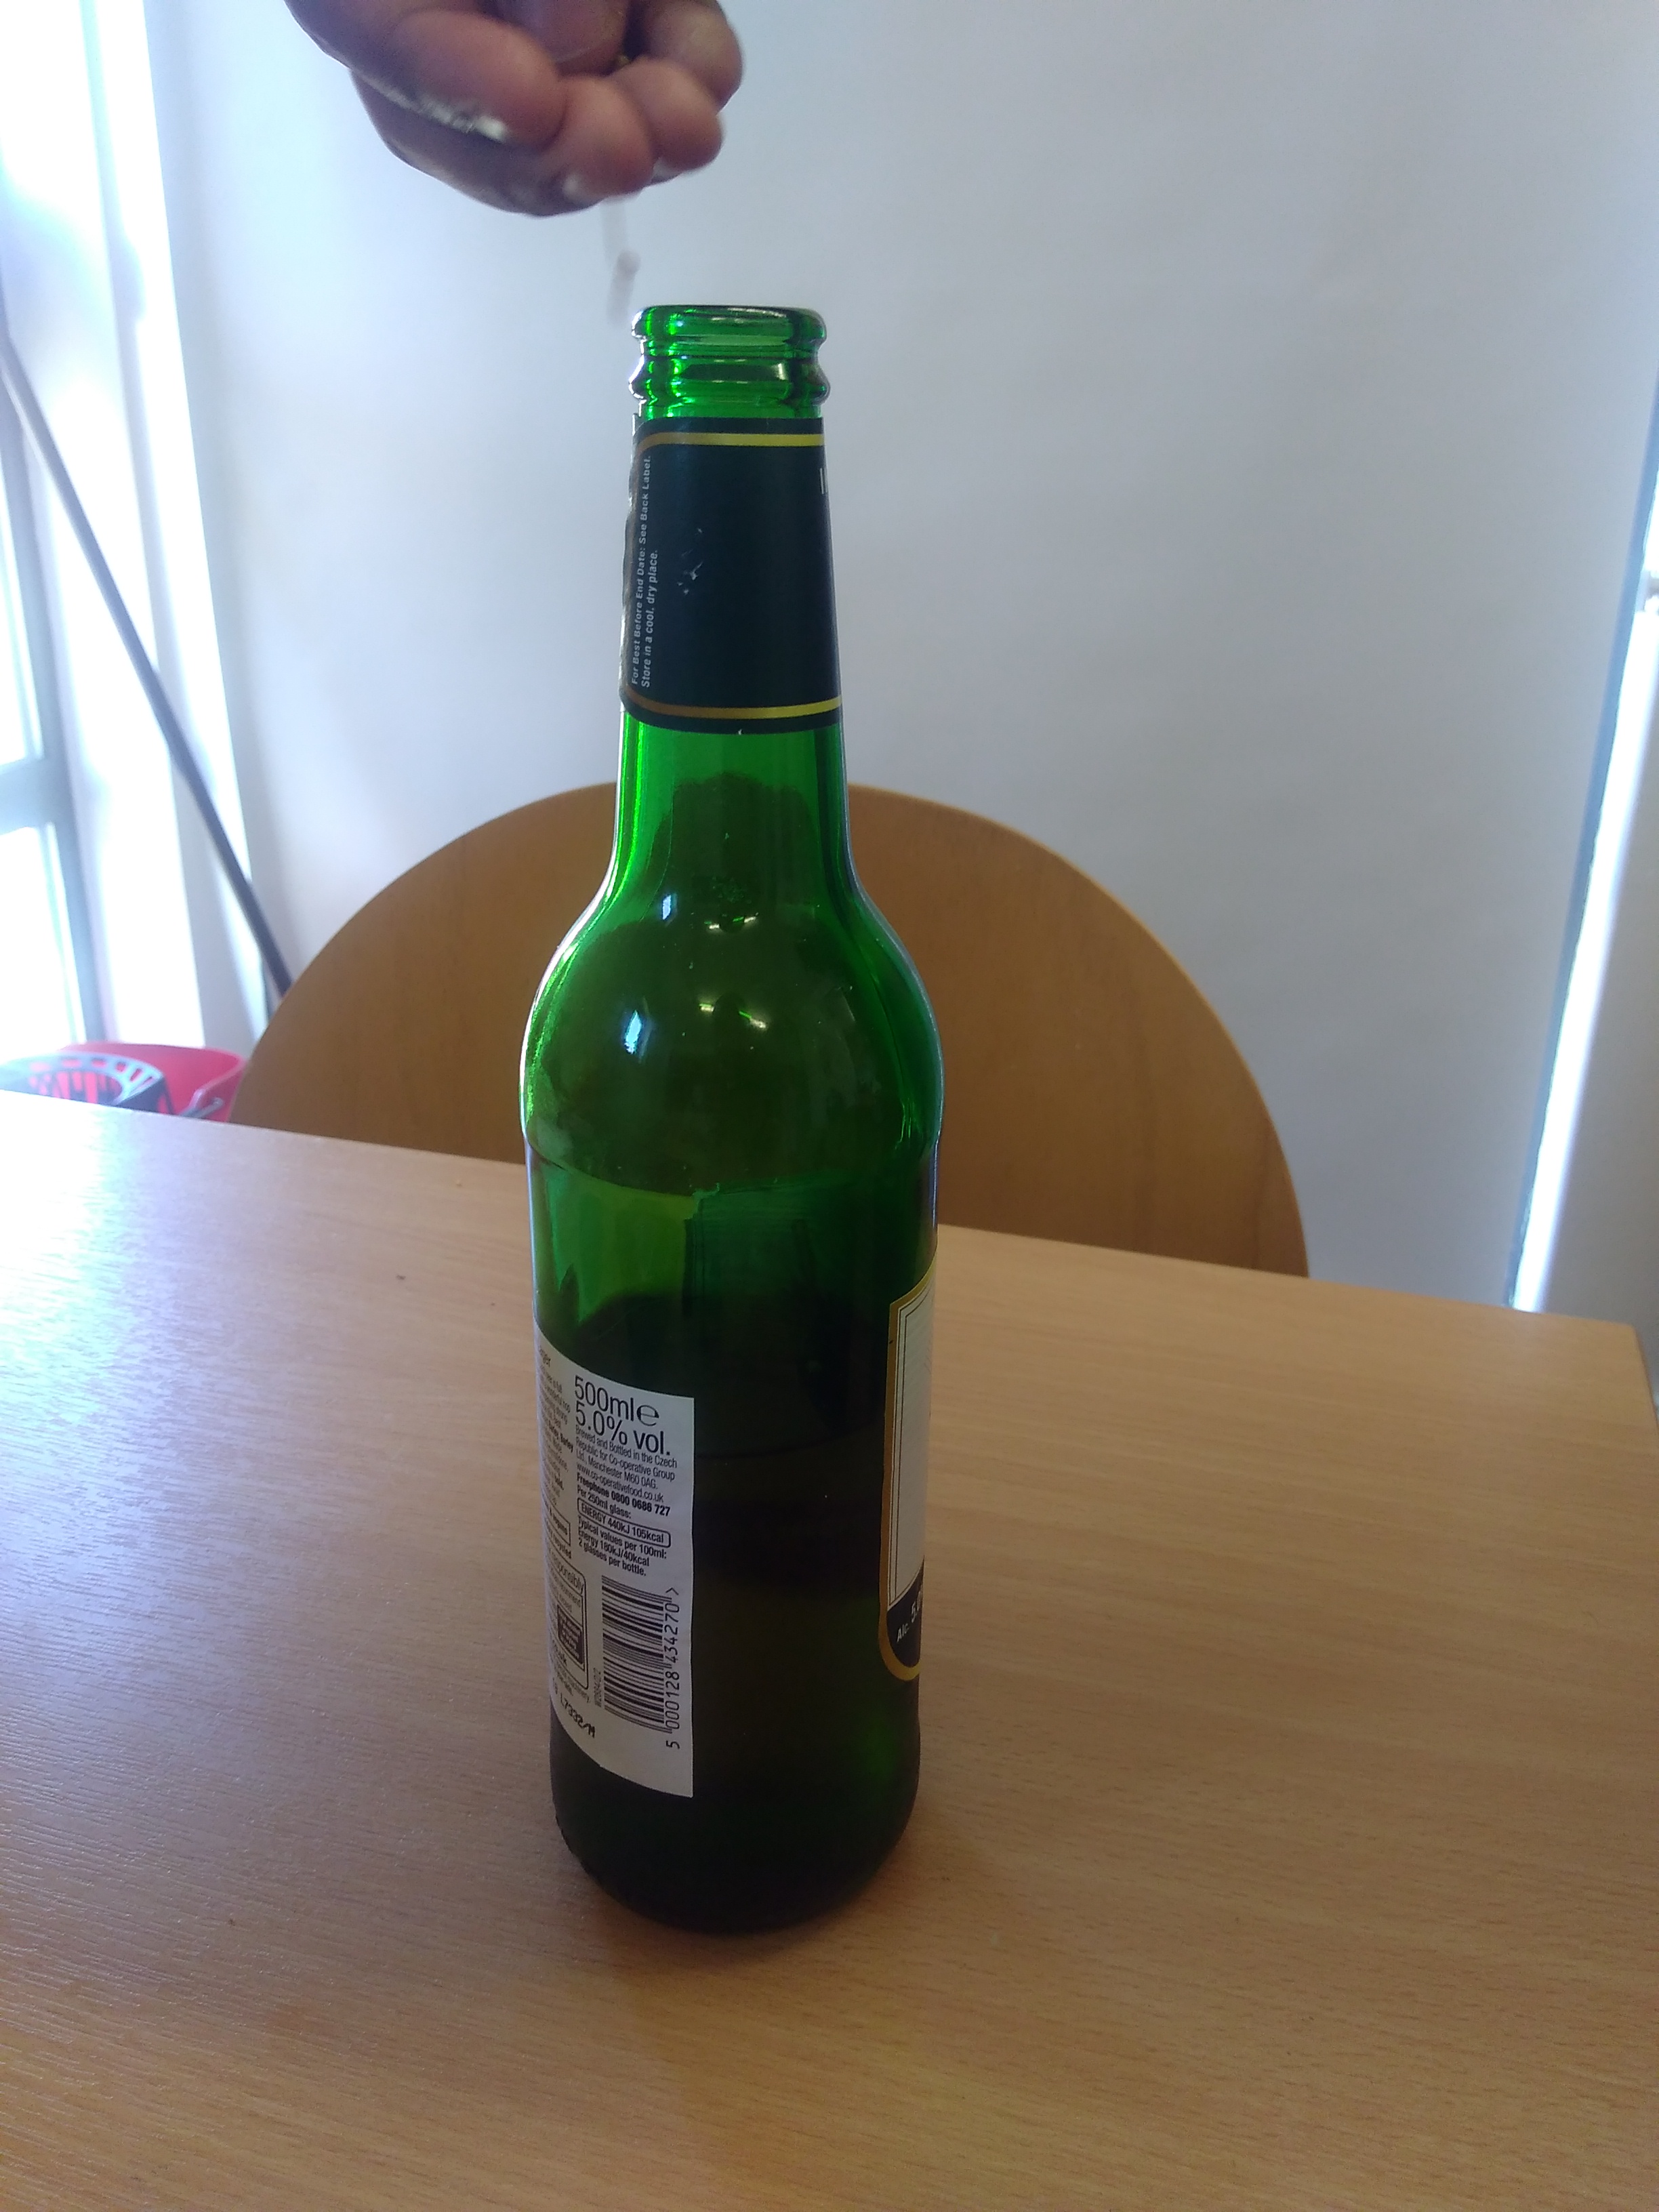 Lincolnshire Police advice people to cover their bottles when they are out in club. Photo: Deeksha Teri